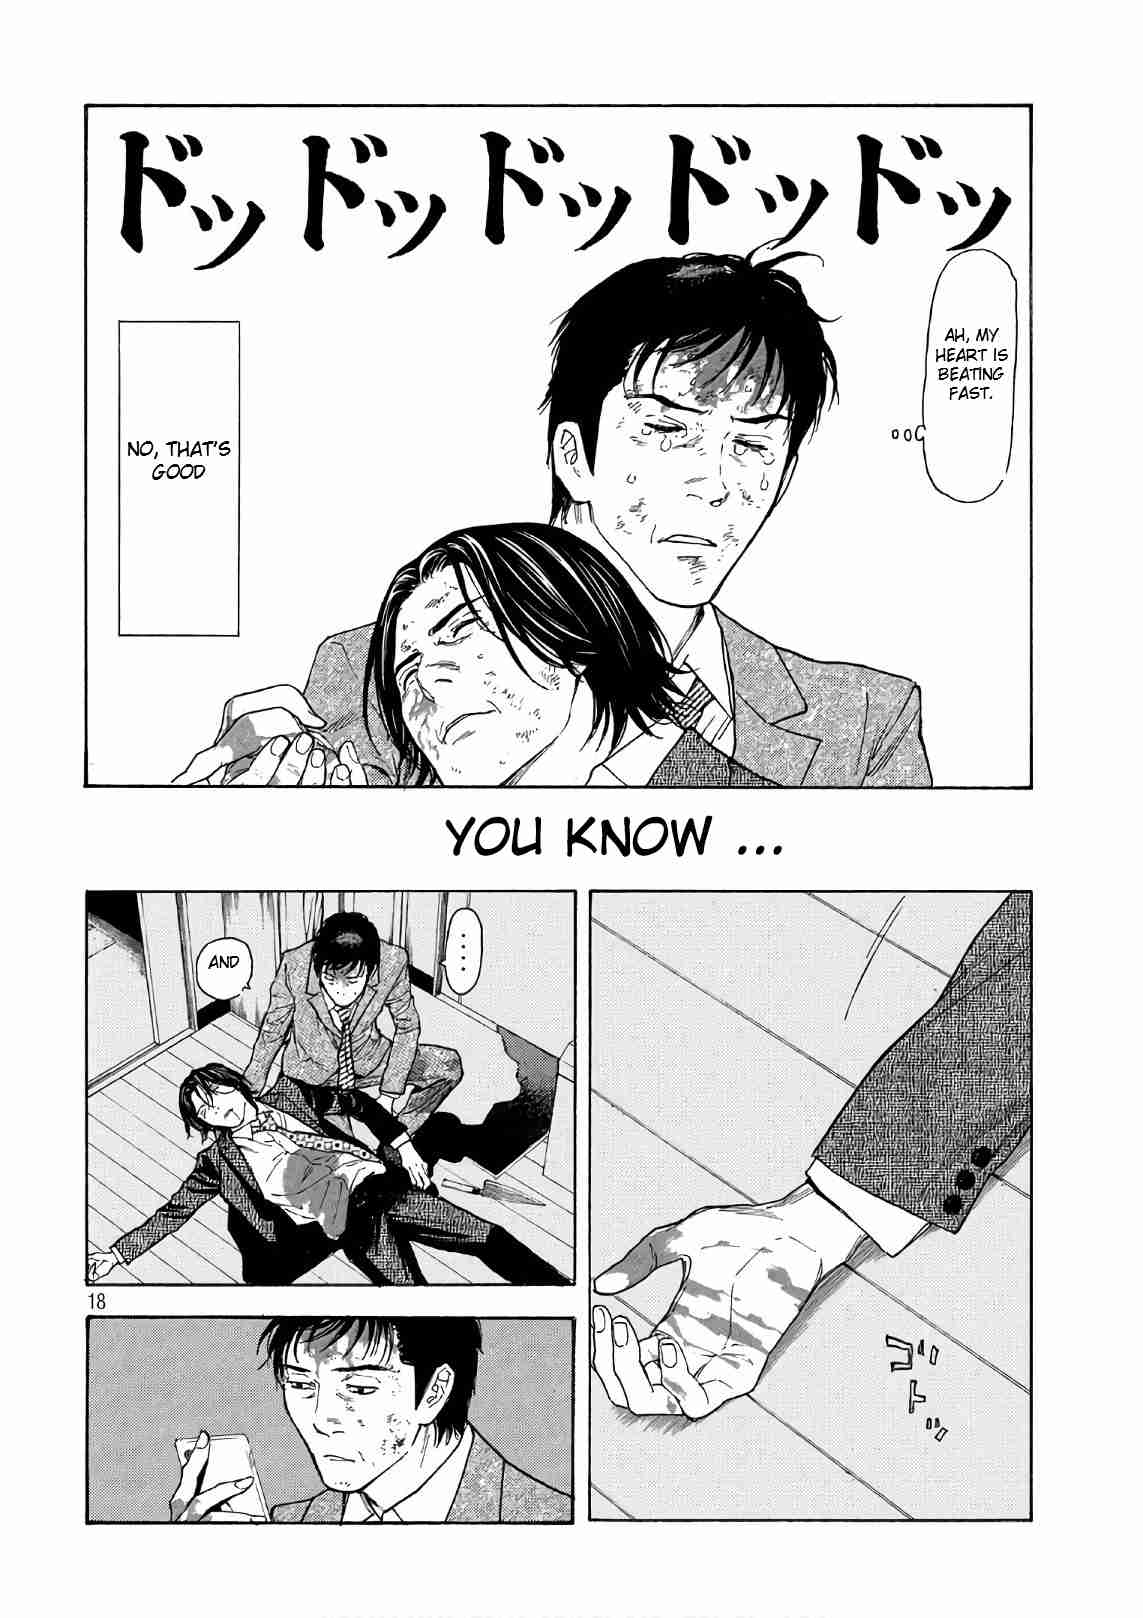 My Home Hero Vol. 6 Ch. 46 Meaning of Life